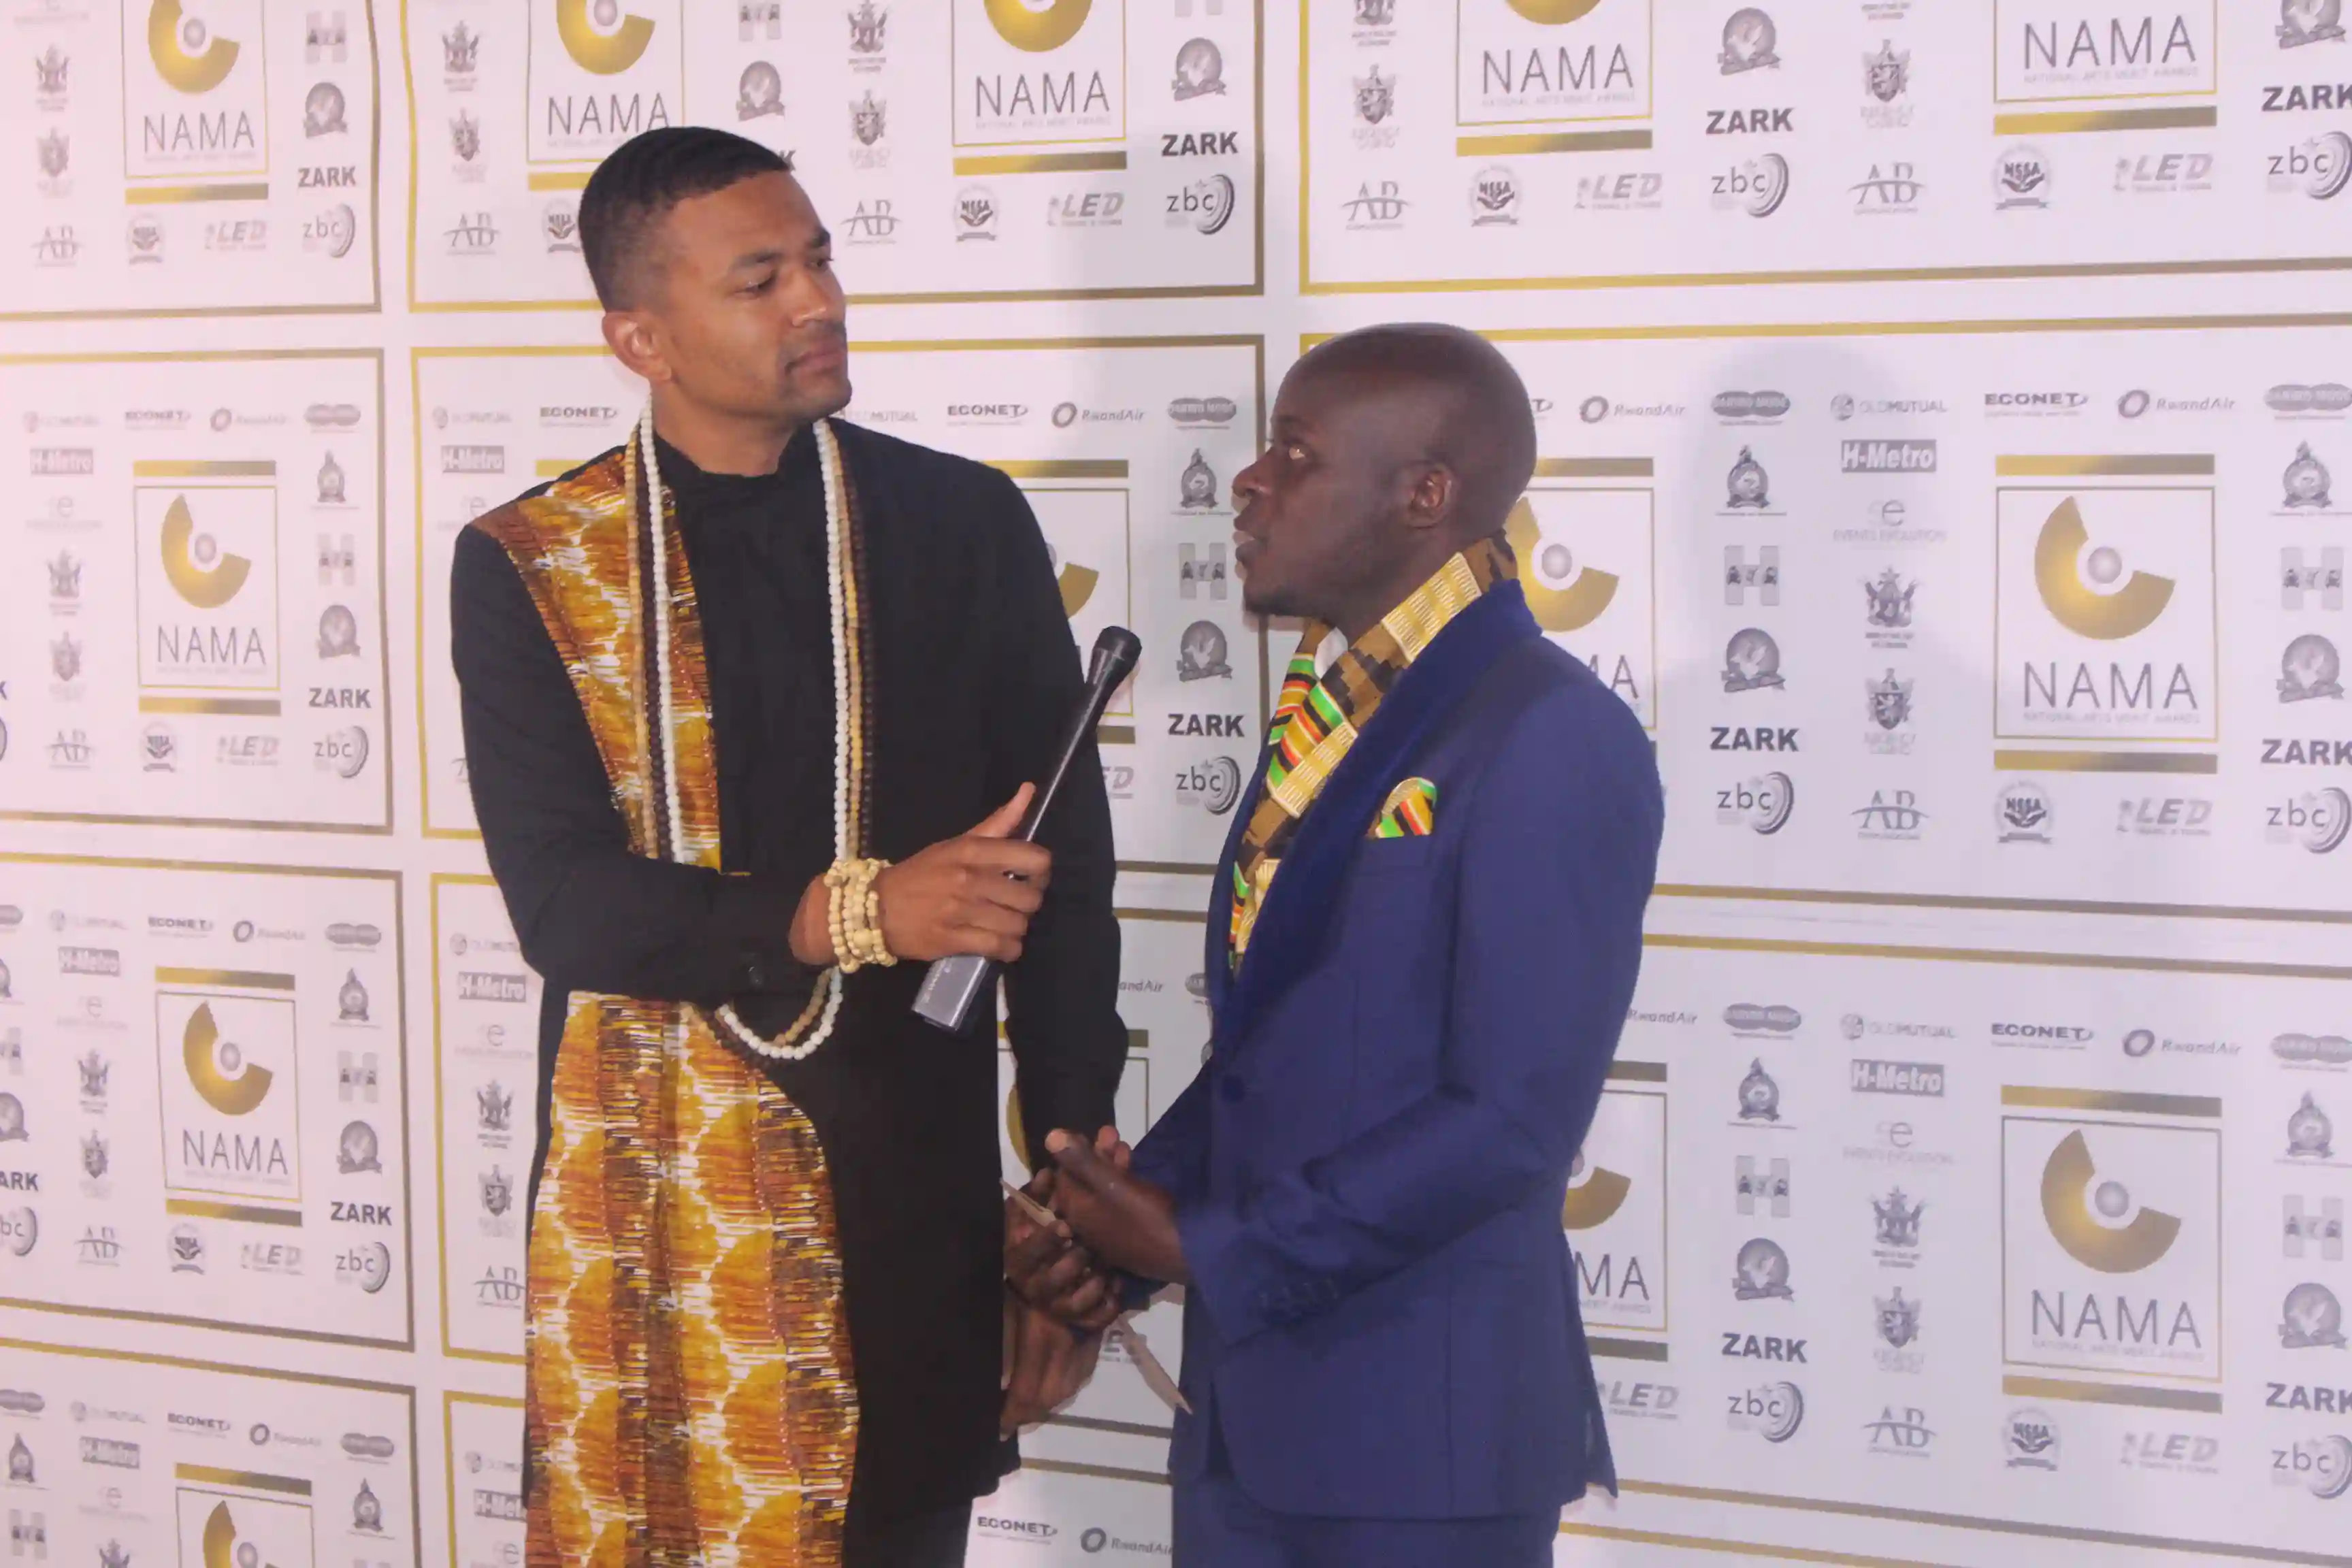 UPDATE: The 18th Edition of the NAMA Awards 2019